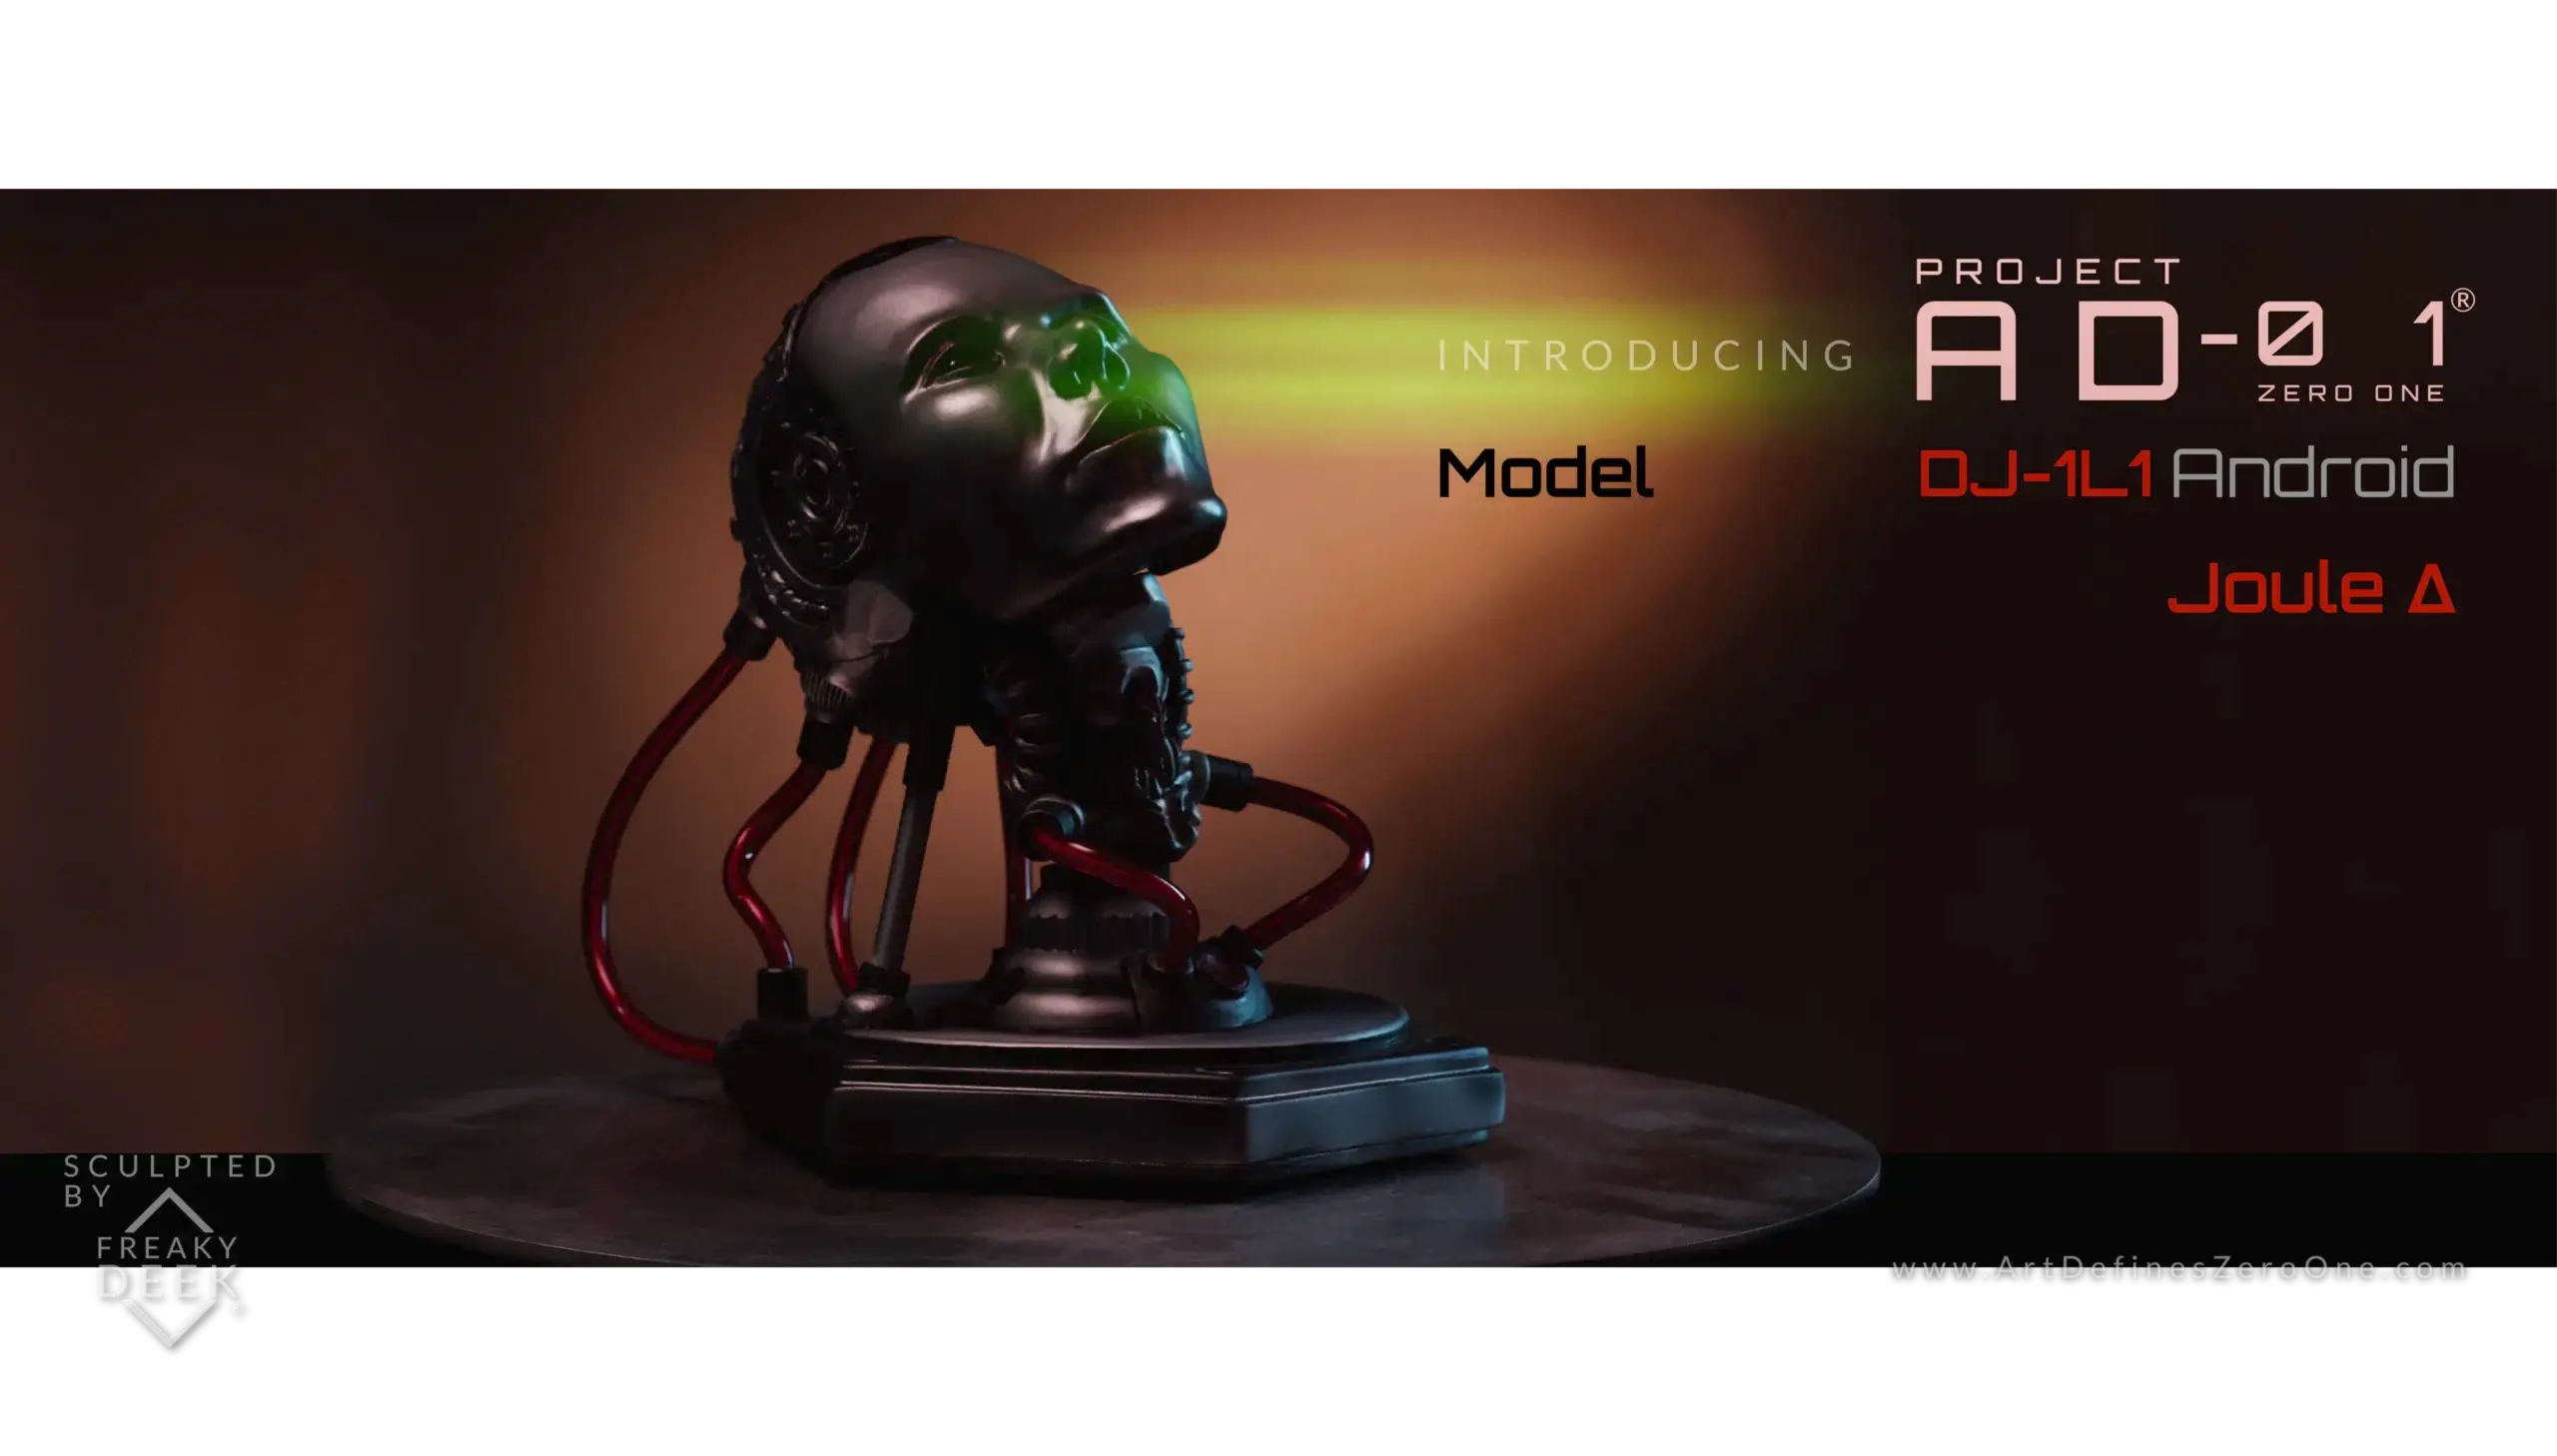 Project AD-01 handmade android red sculpture Joule front view